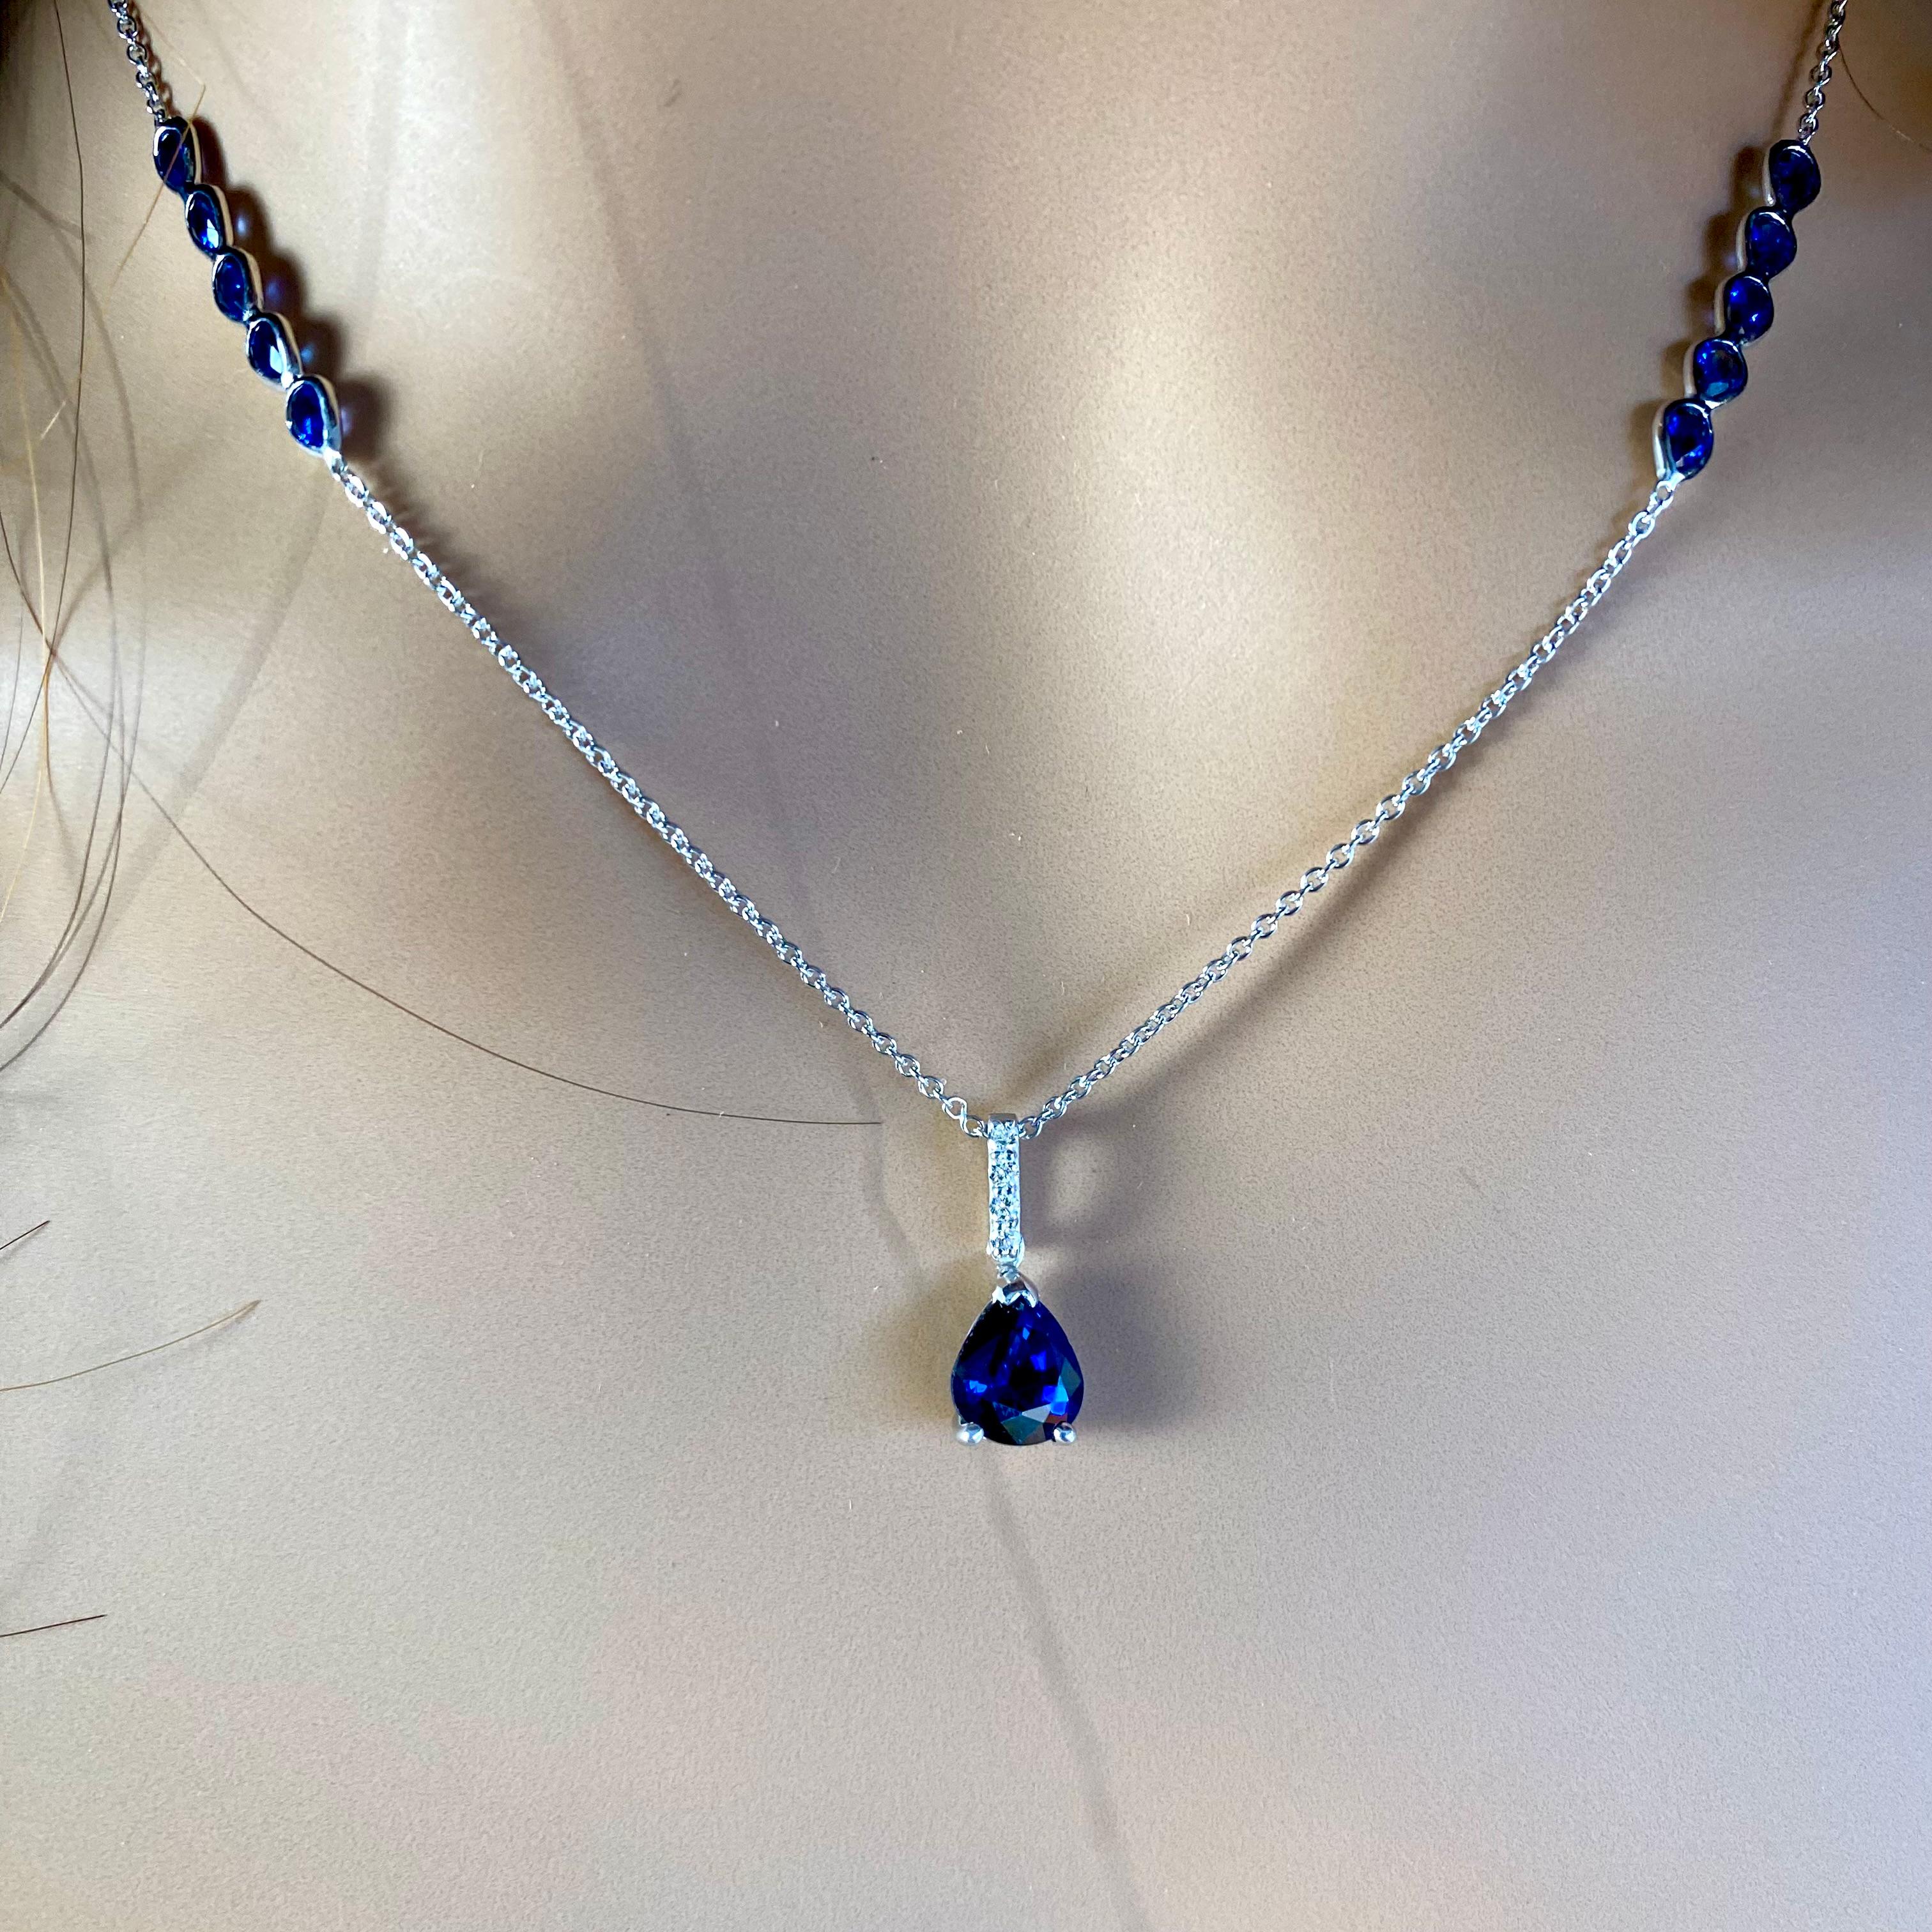 Eleven Pear Sapphires Diamonds 4.83 Carat White Gold 19.5 Inch Long Necklace For Sale 2